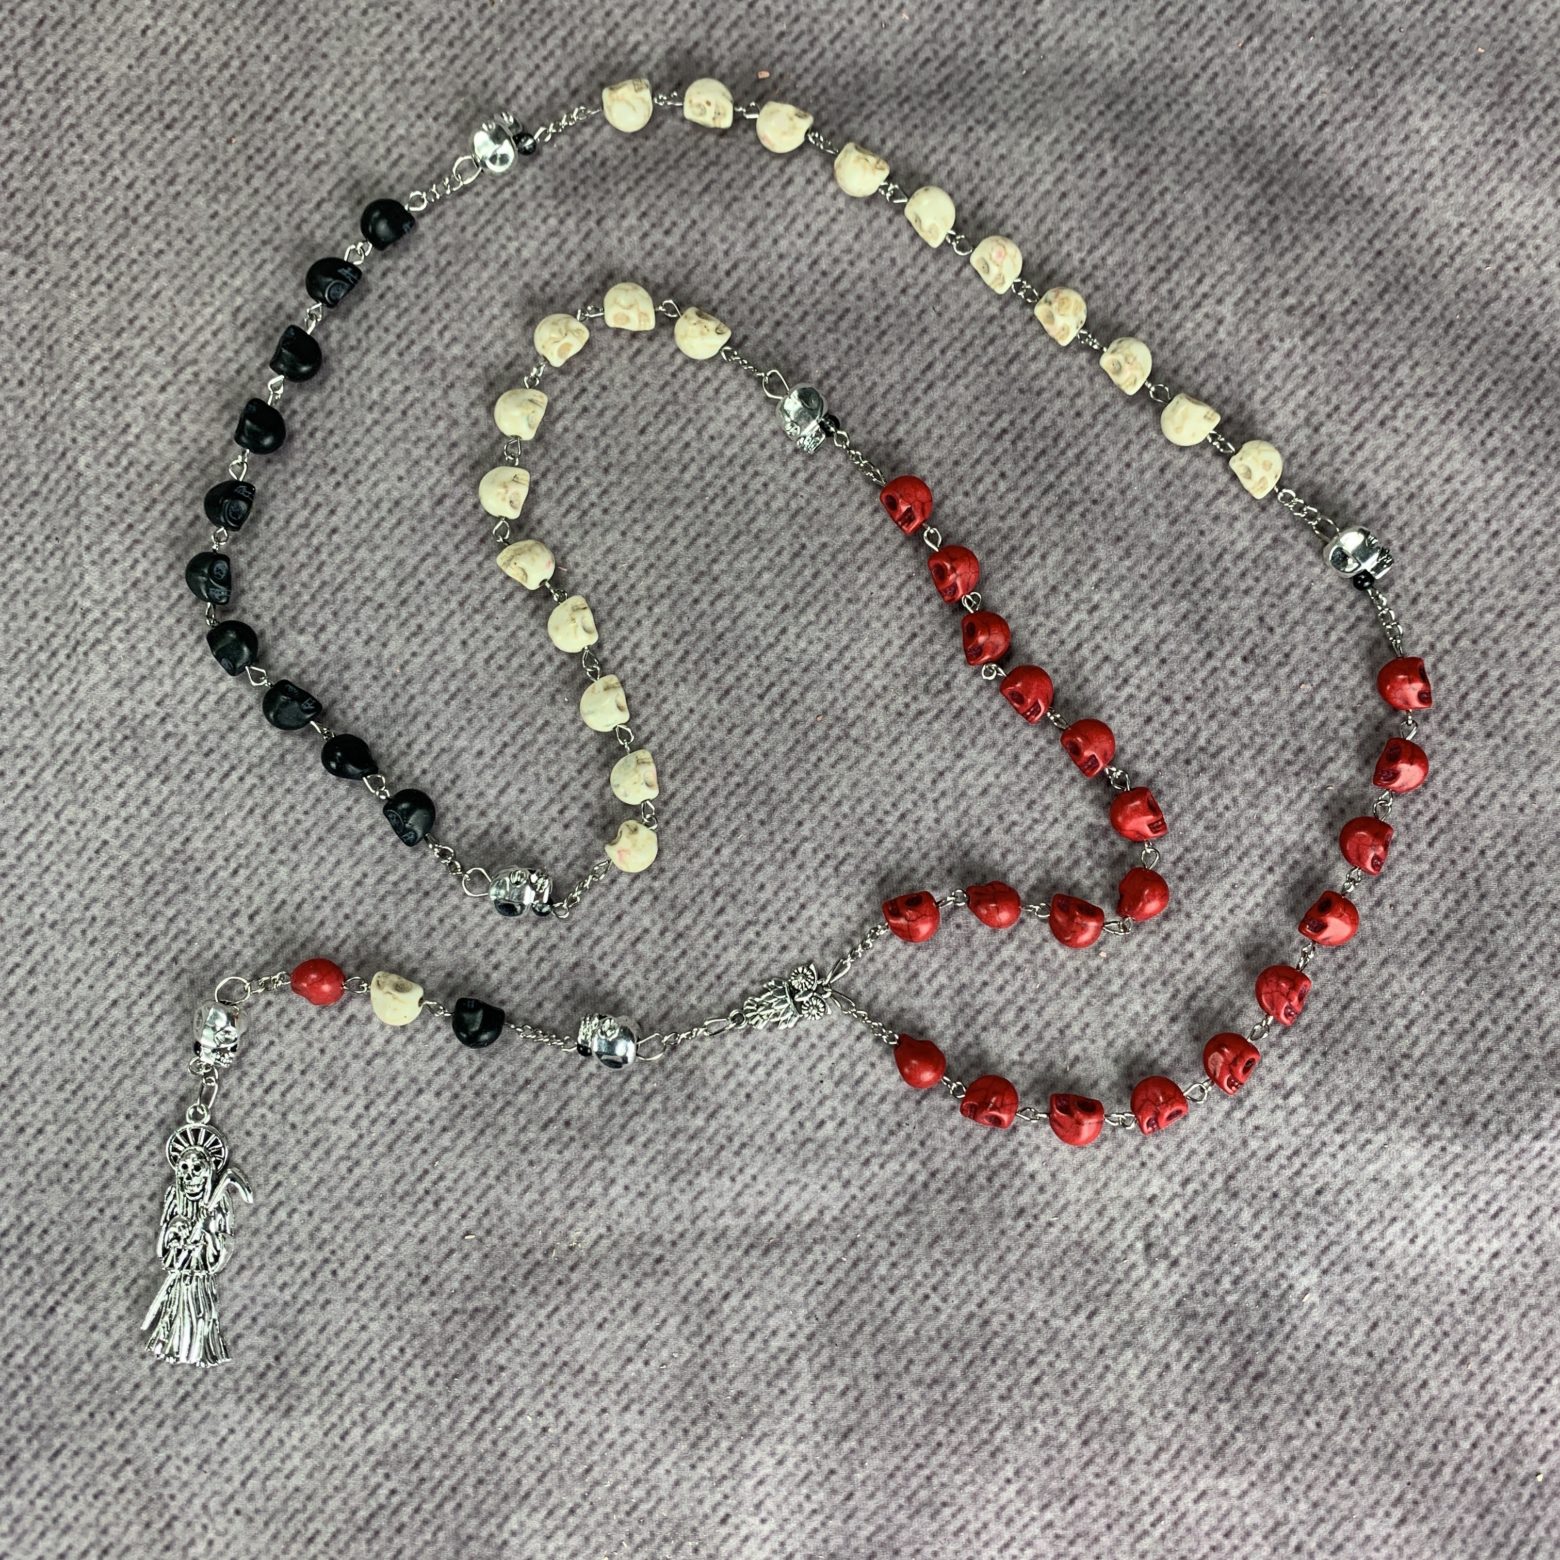 Witches' Rosaries